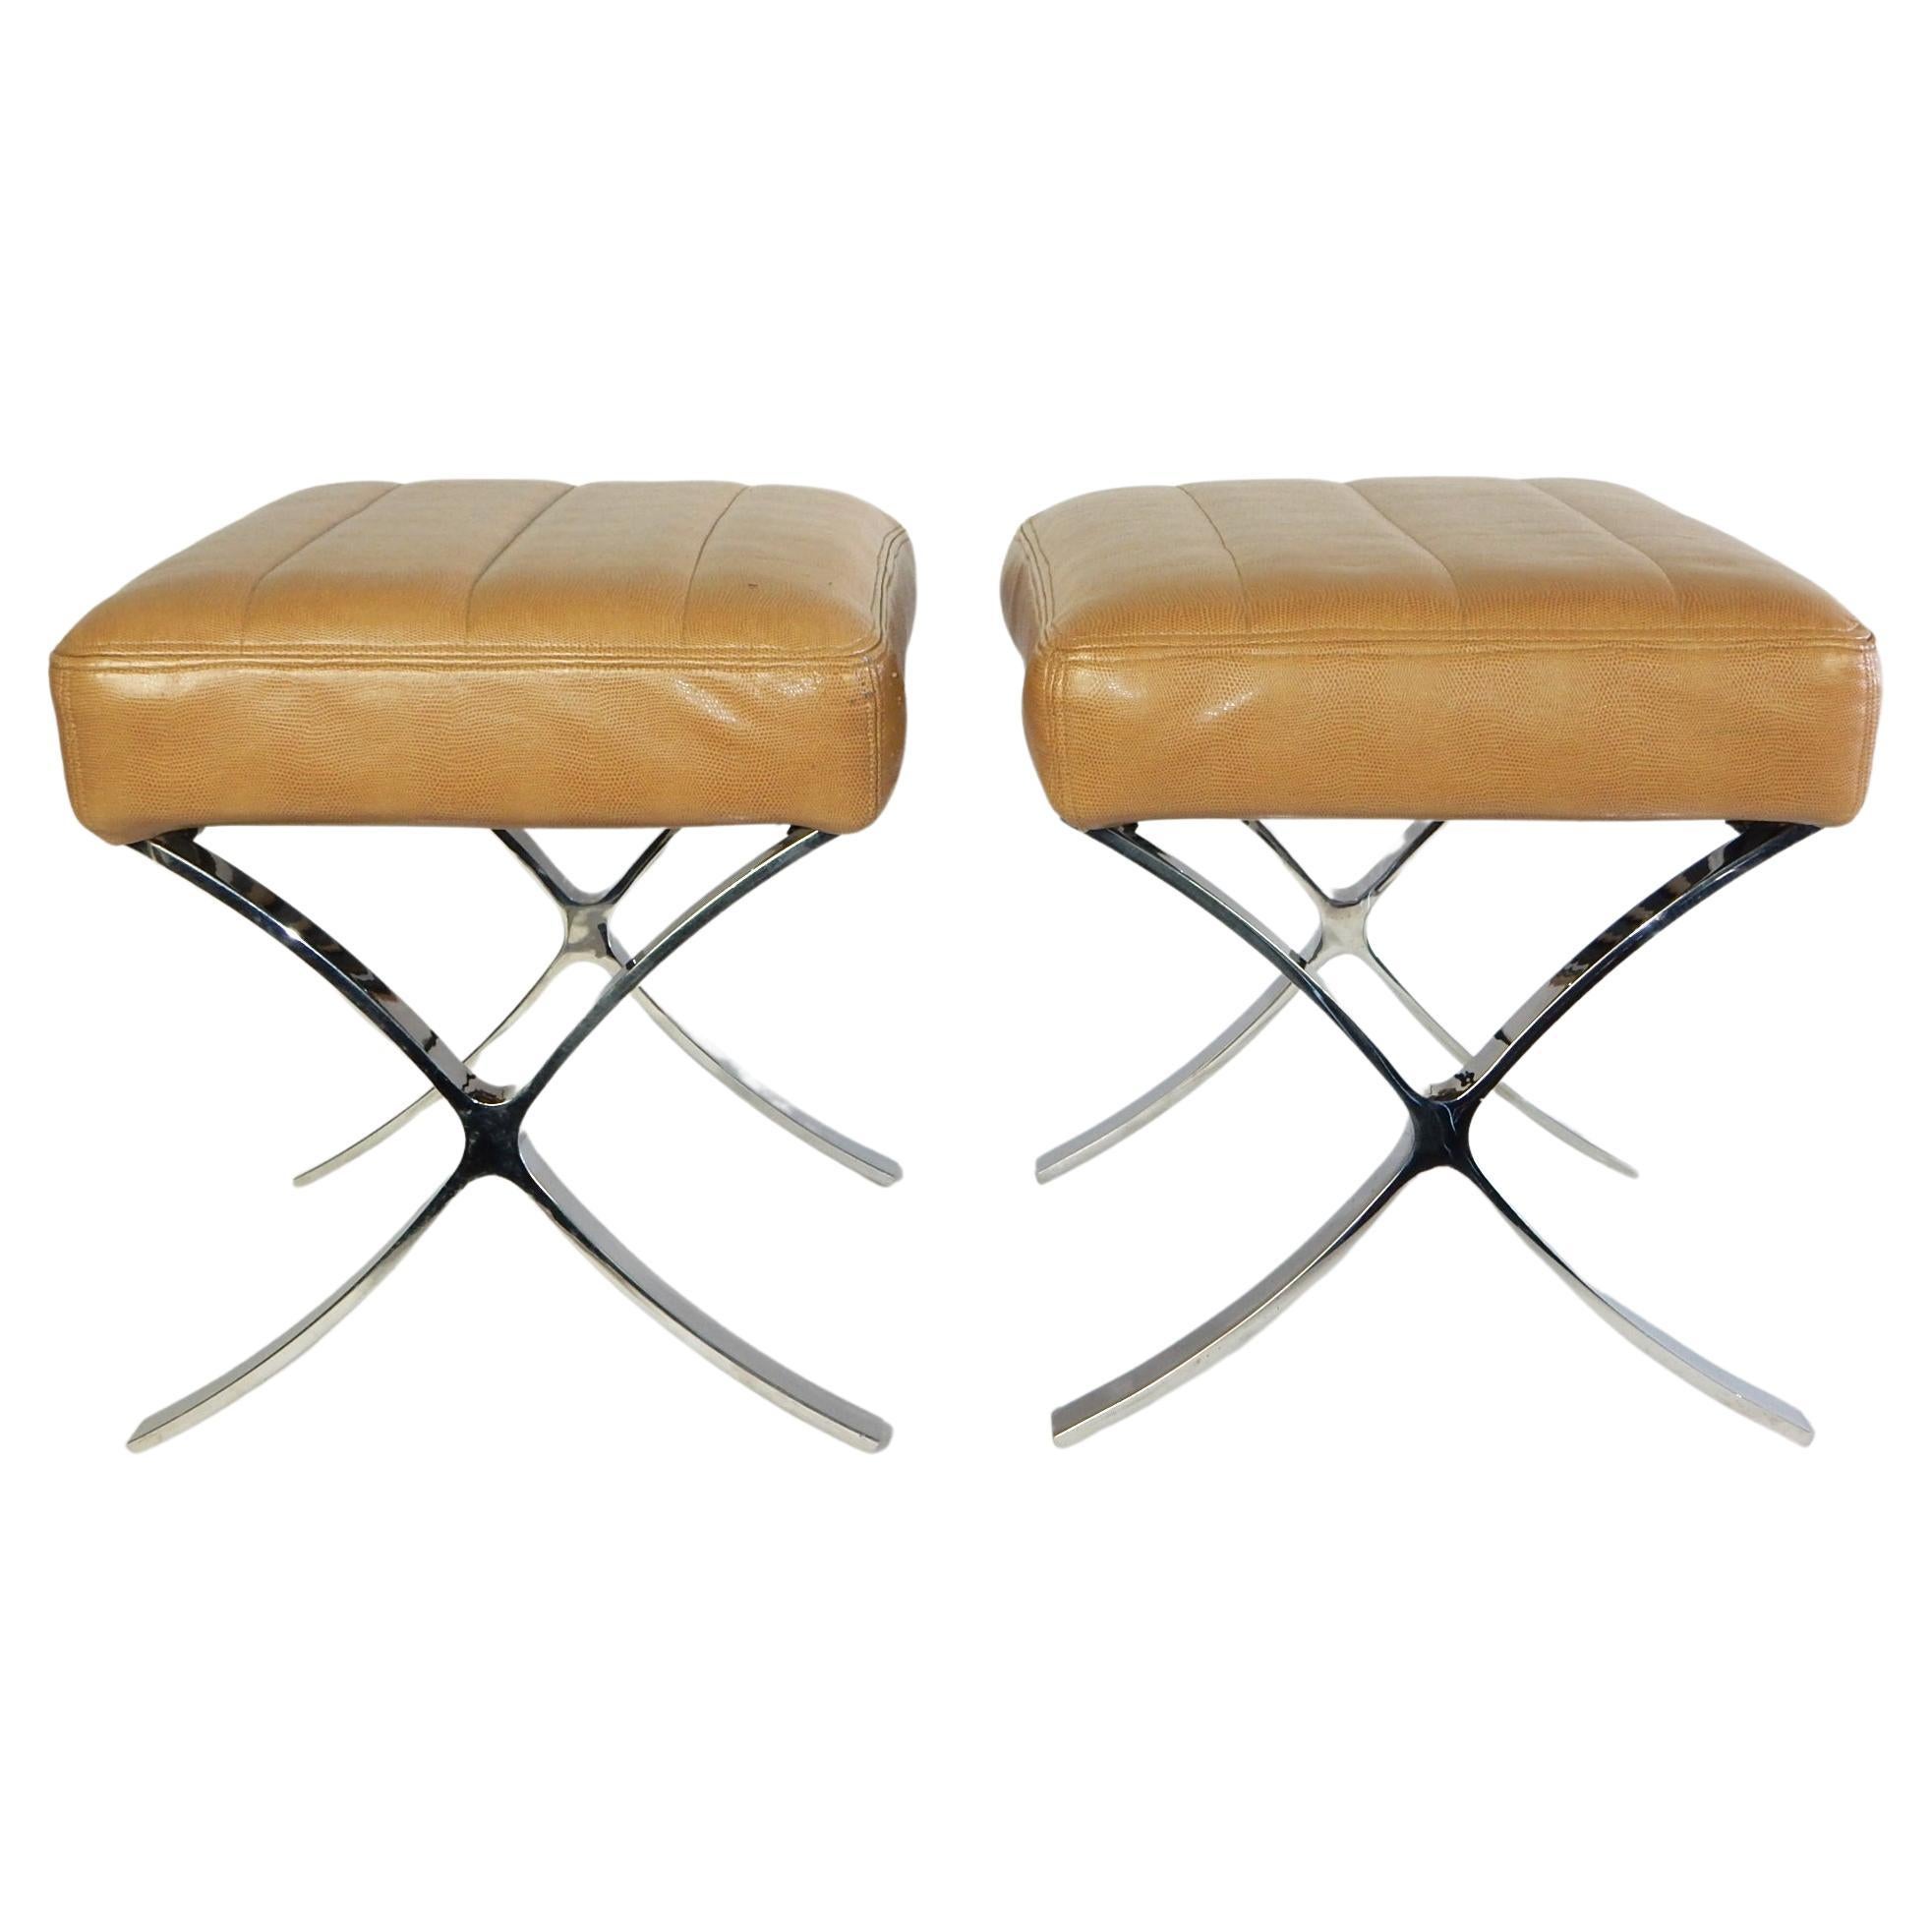 Heavy and well made, these smaller sized Barcelona style stools are
circa 1990s. Polished stainless steel X base with faux Shagreen leather upholstery. Cushions are attached. Made in the USA. 24